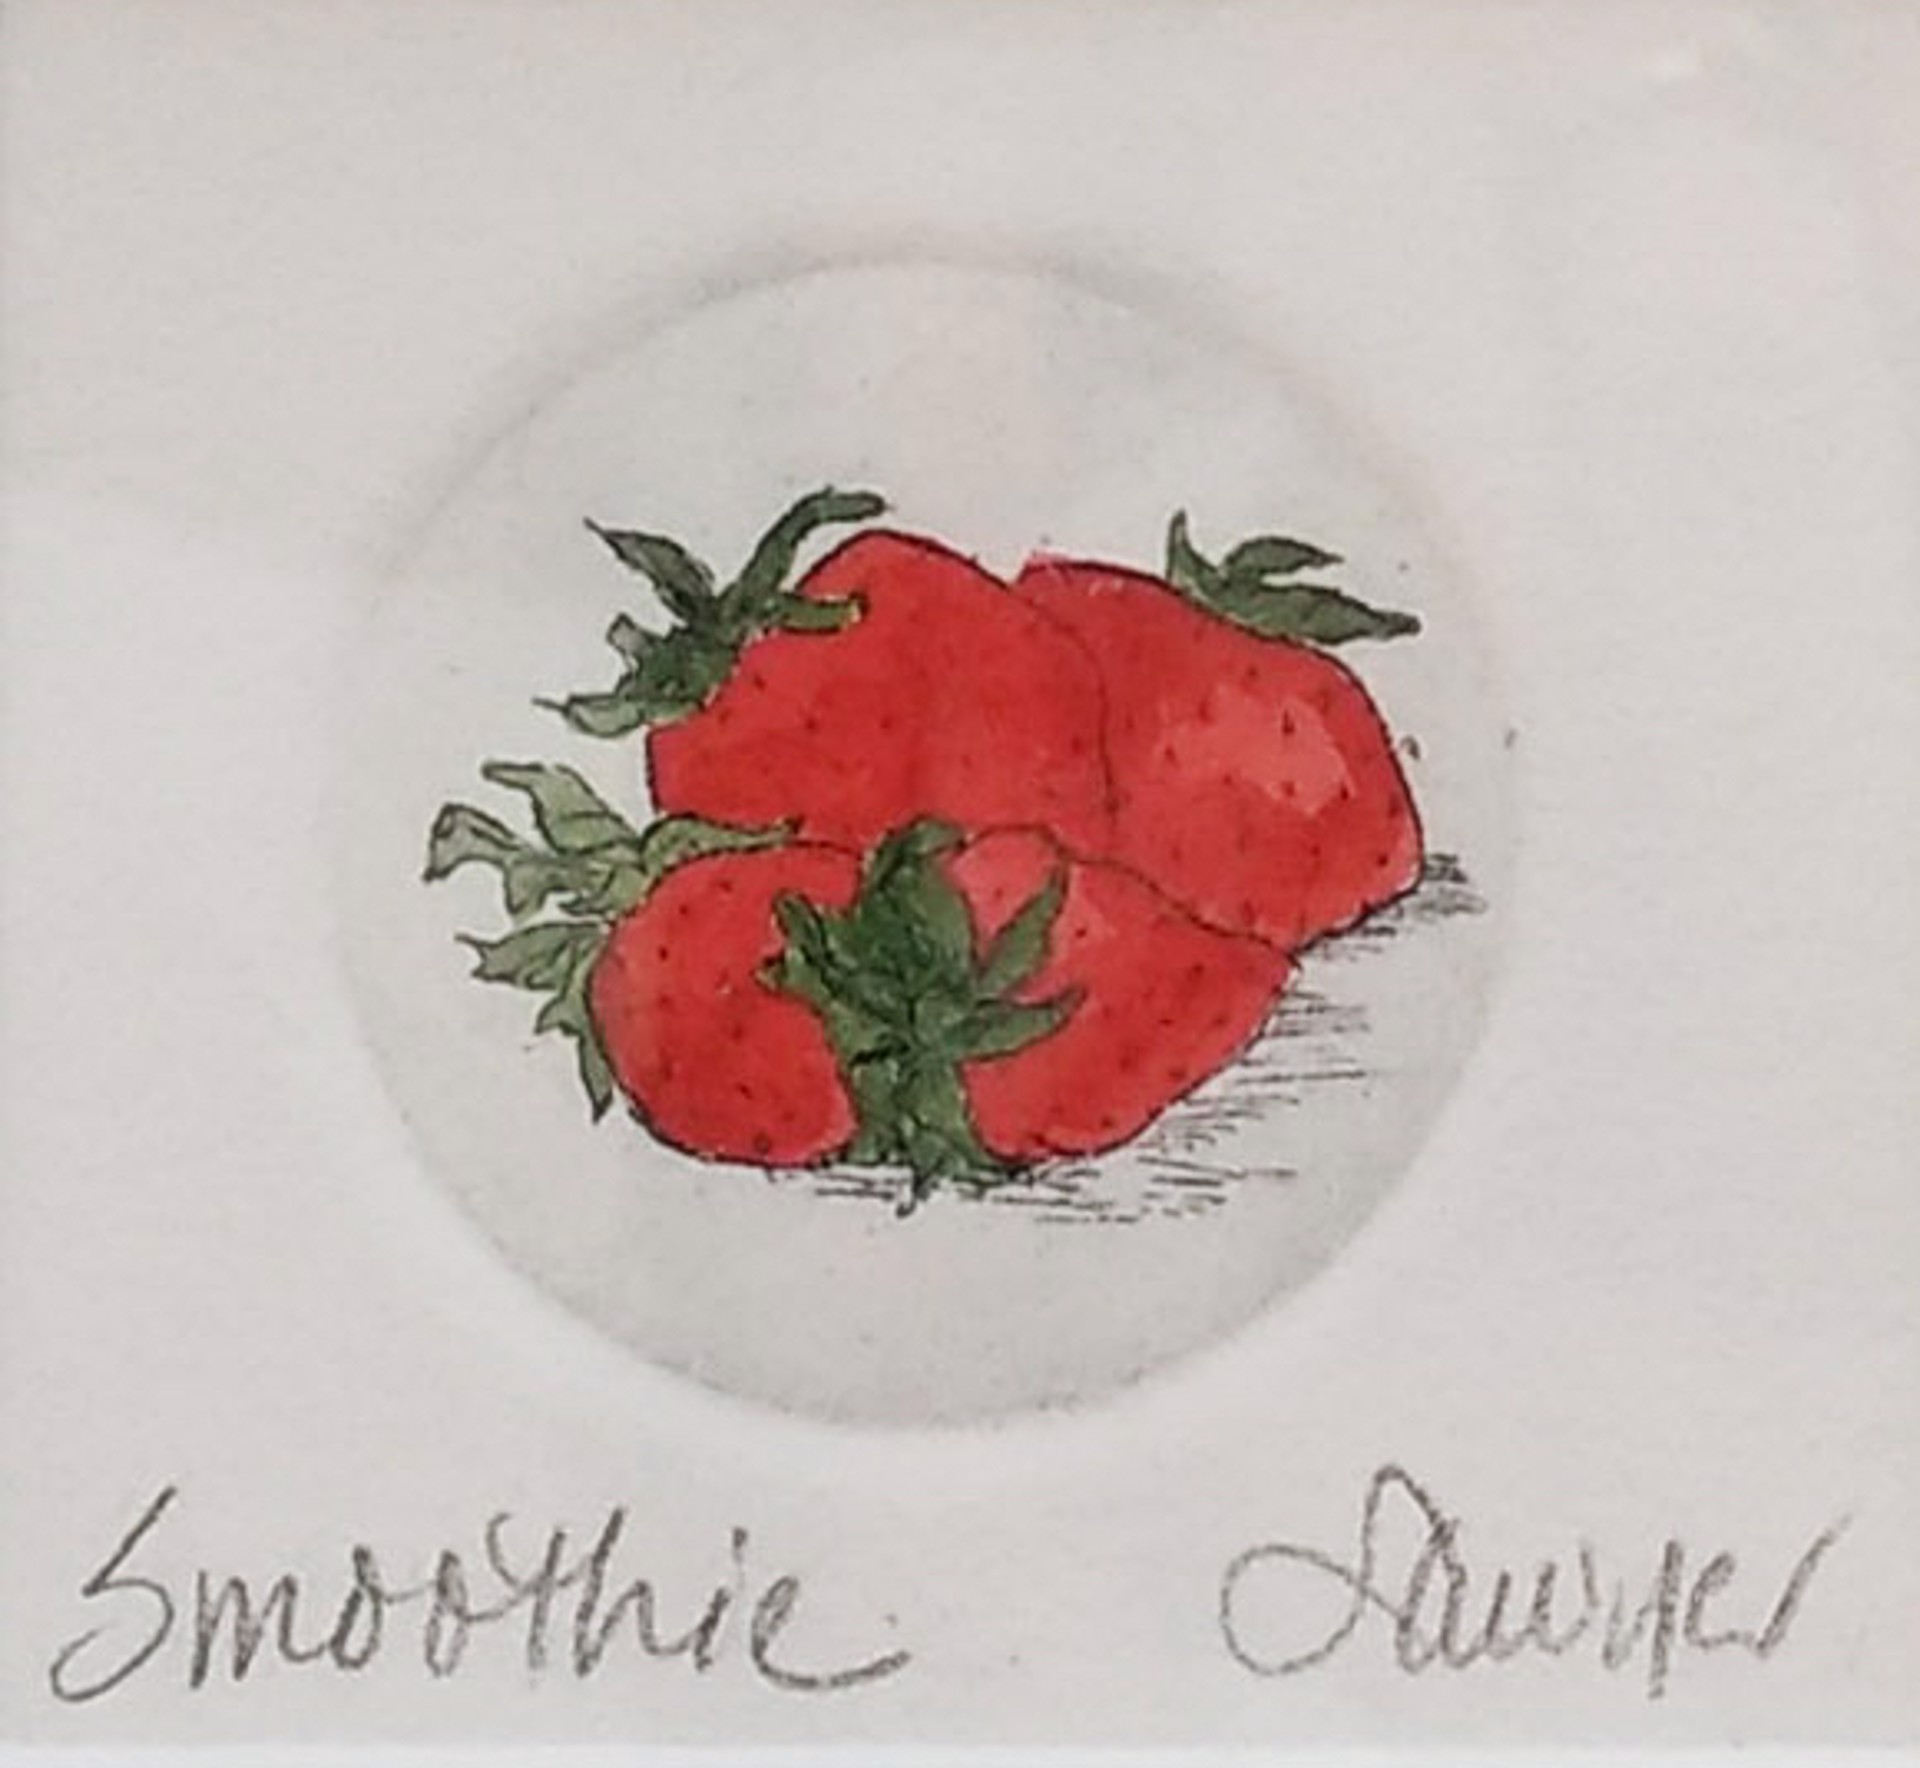 Strawberries and Bananas (framed) by Anne Sawyer